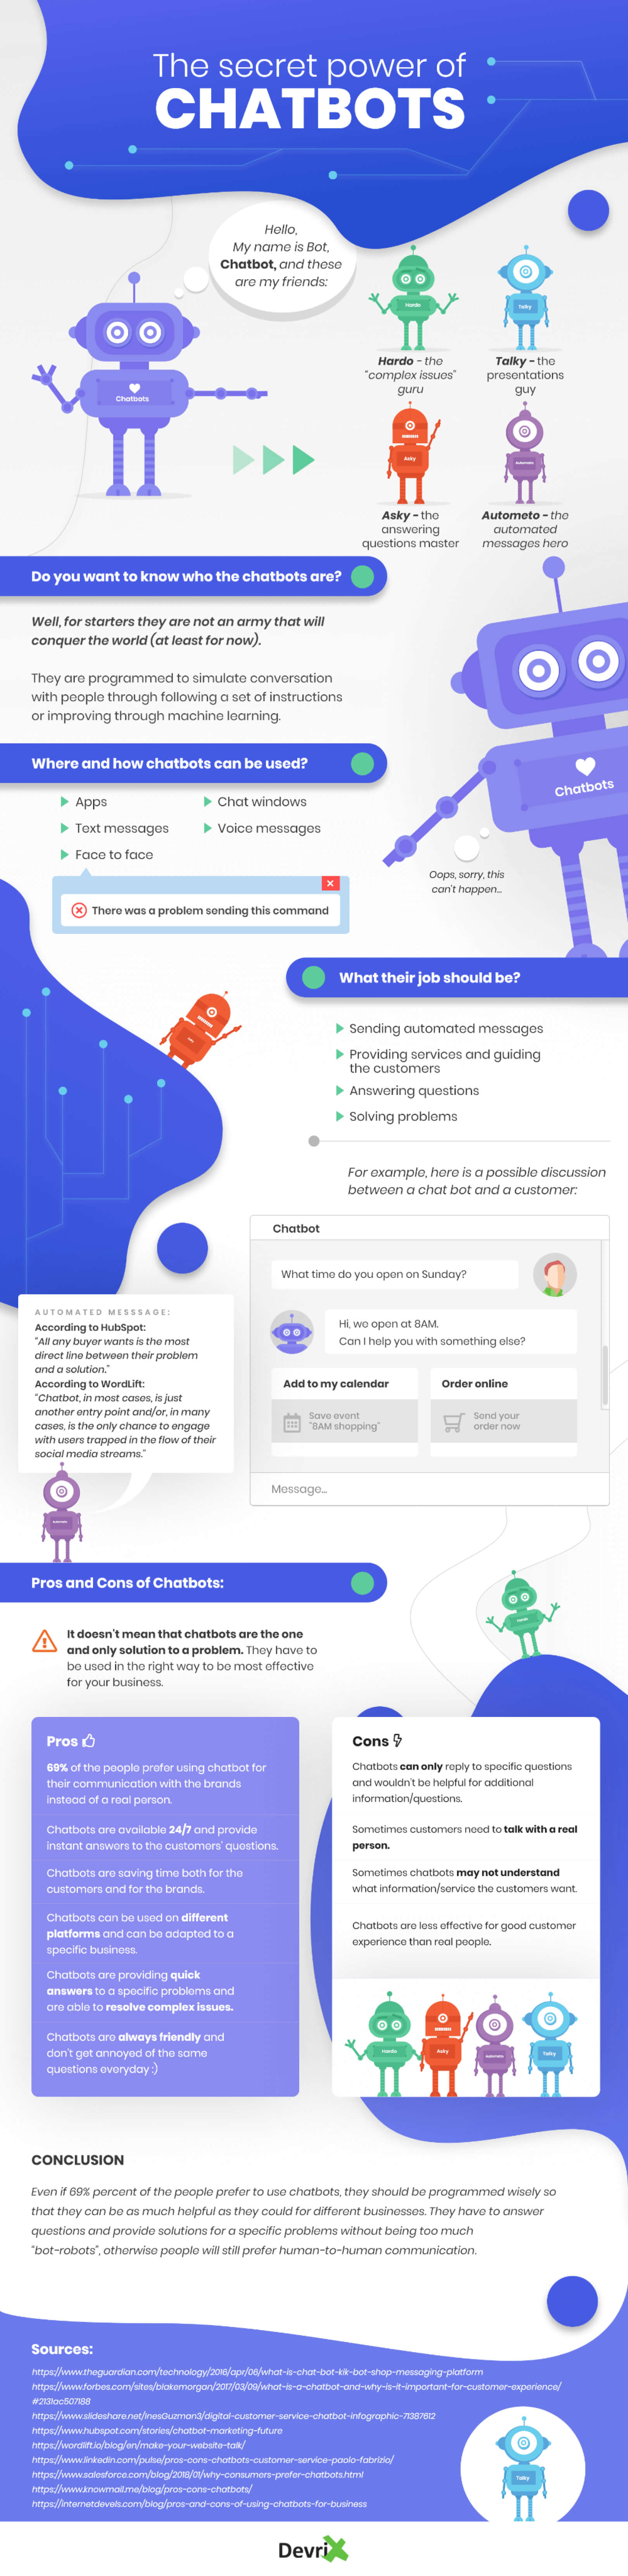 Infographic The Secret Power of Chatbots